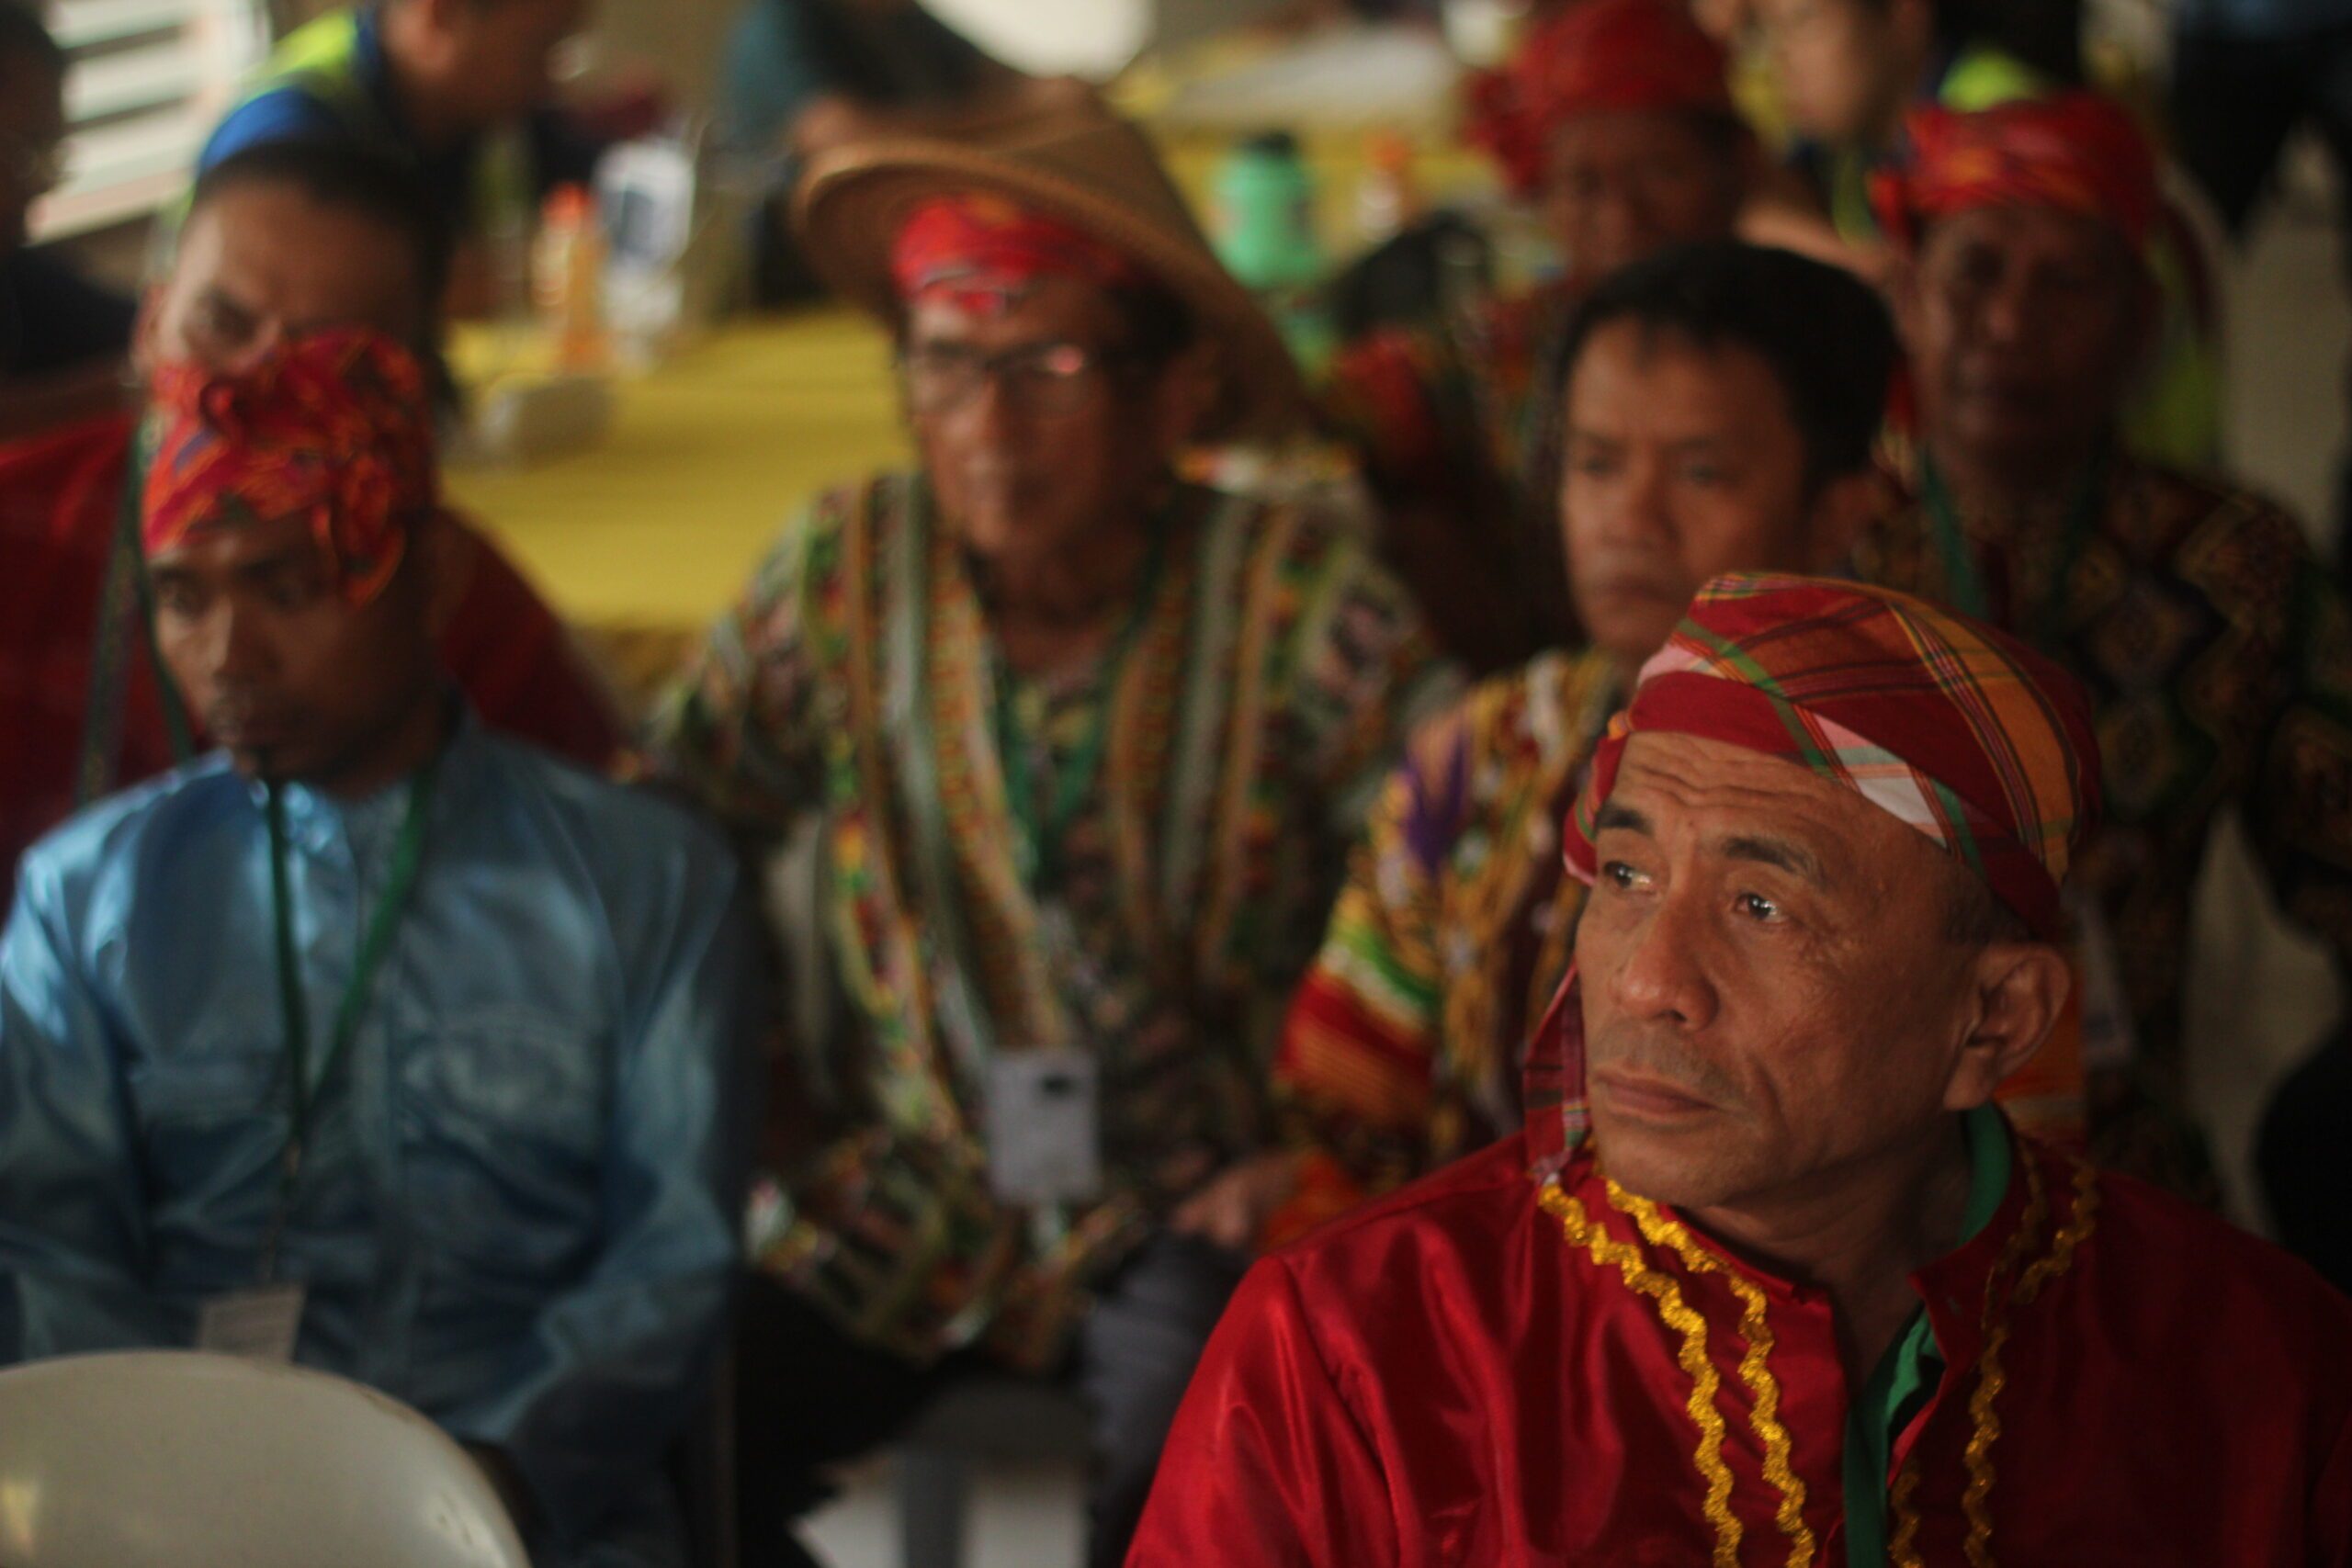 Lumad on equal footing with Moro in proposed entity – Iqbal